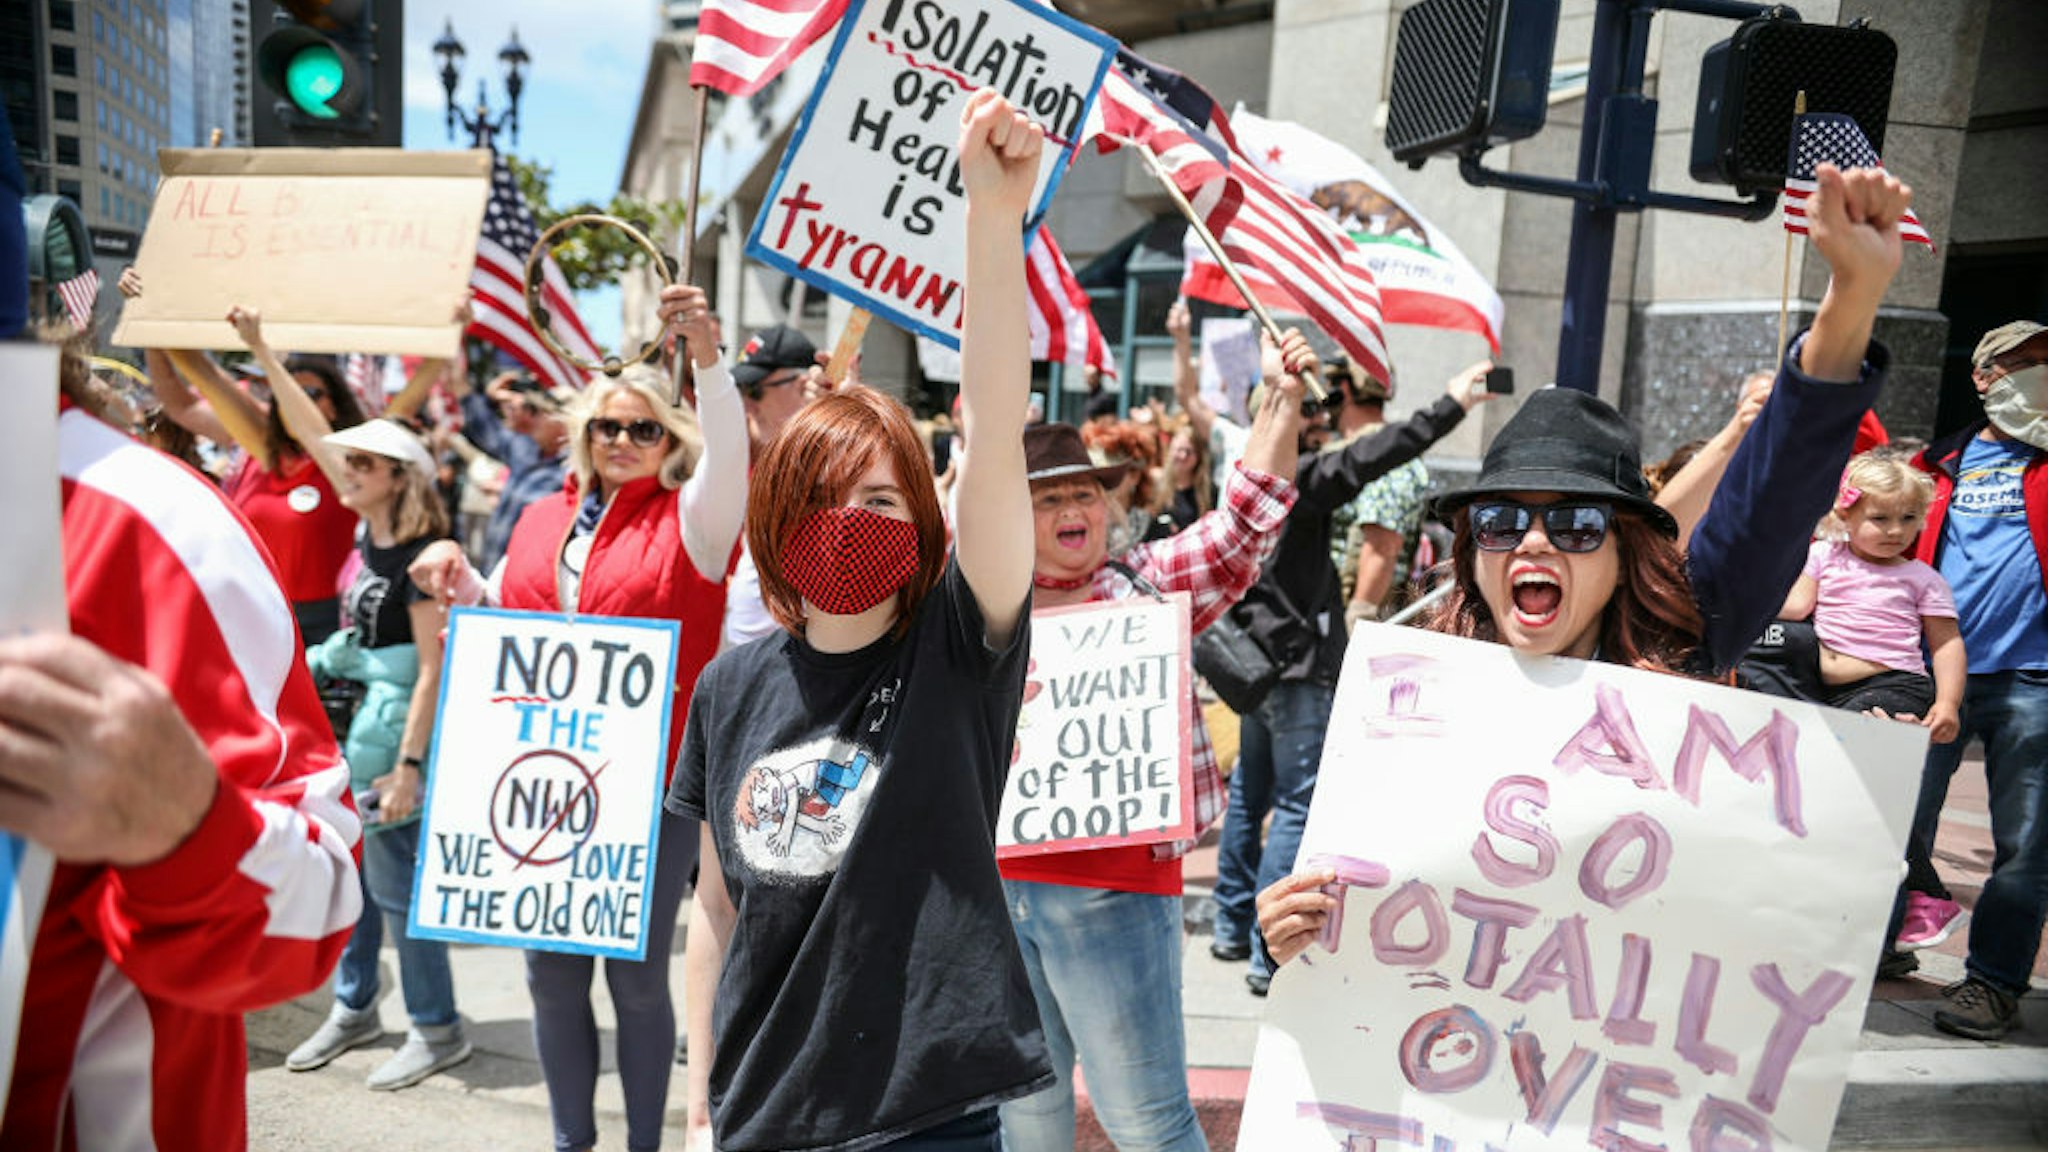 Demonstrators protest during a "Freedom Rally" against Stay-At-Home Directives on April 18, 2020 in San Diego, California.